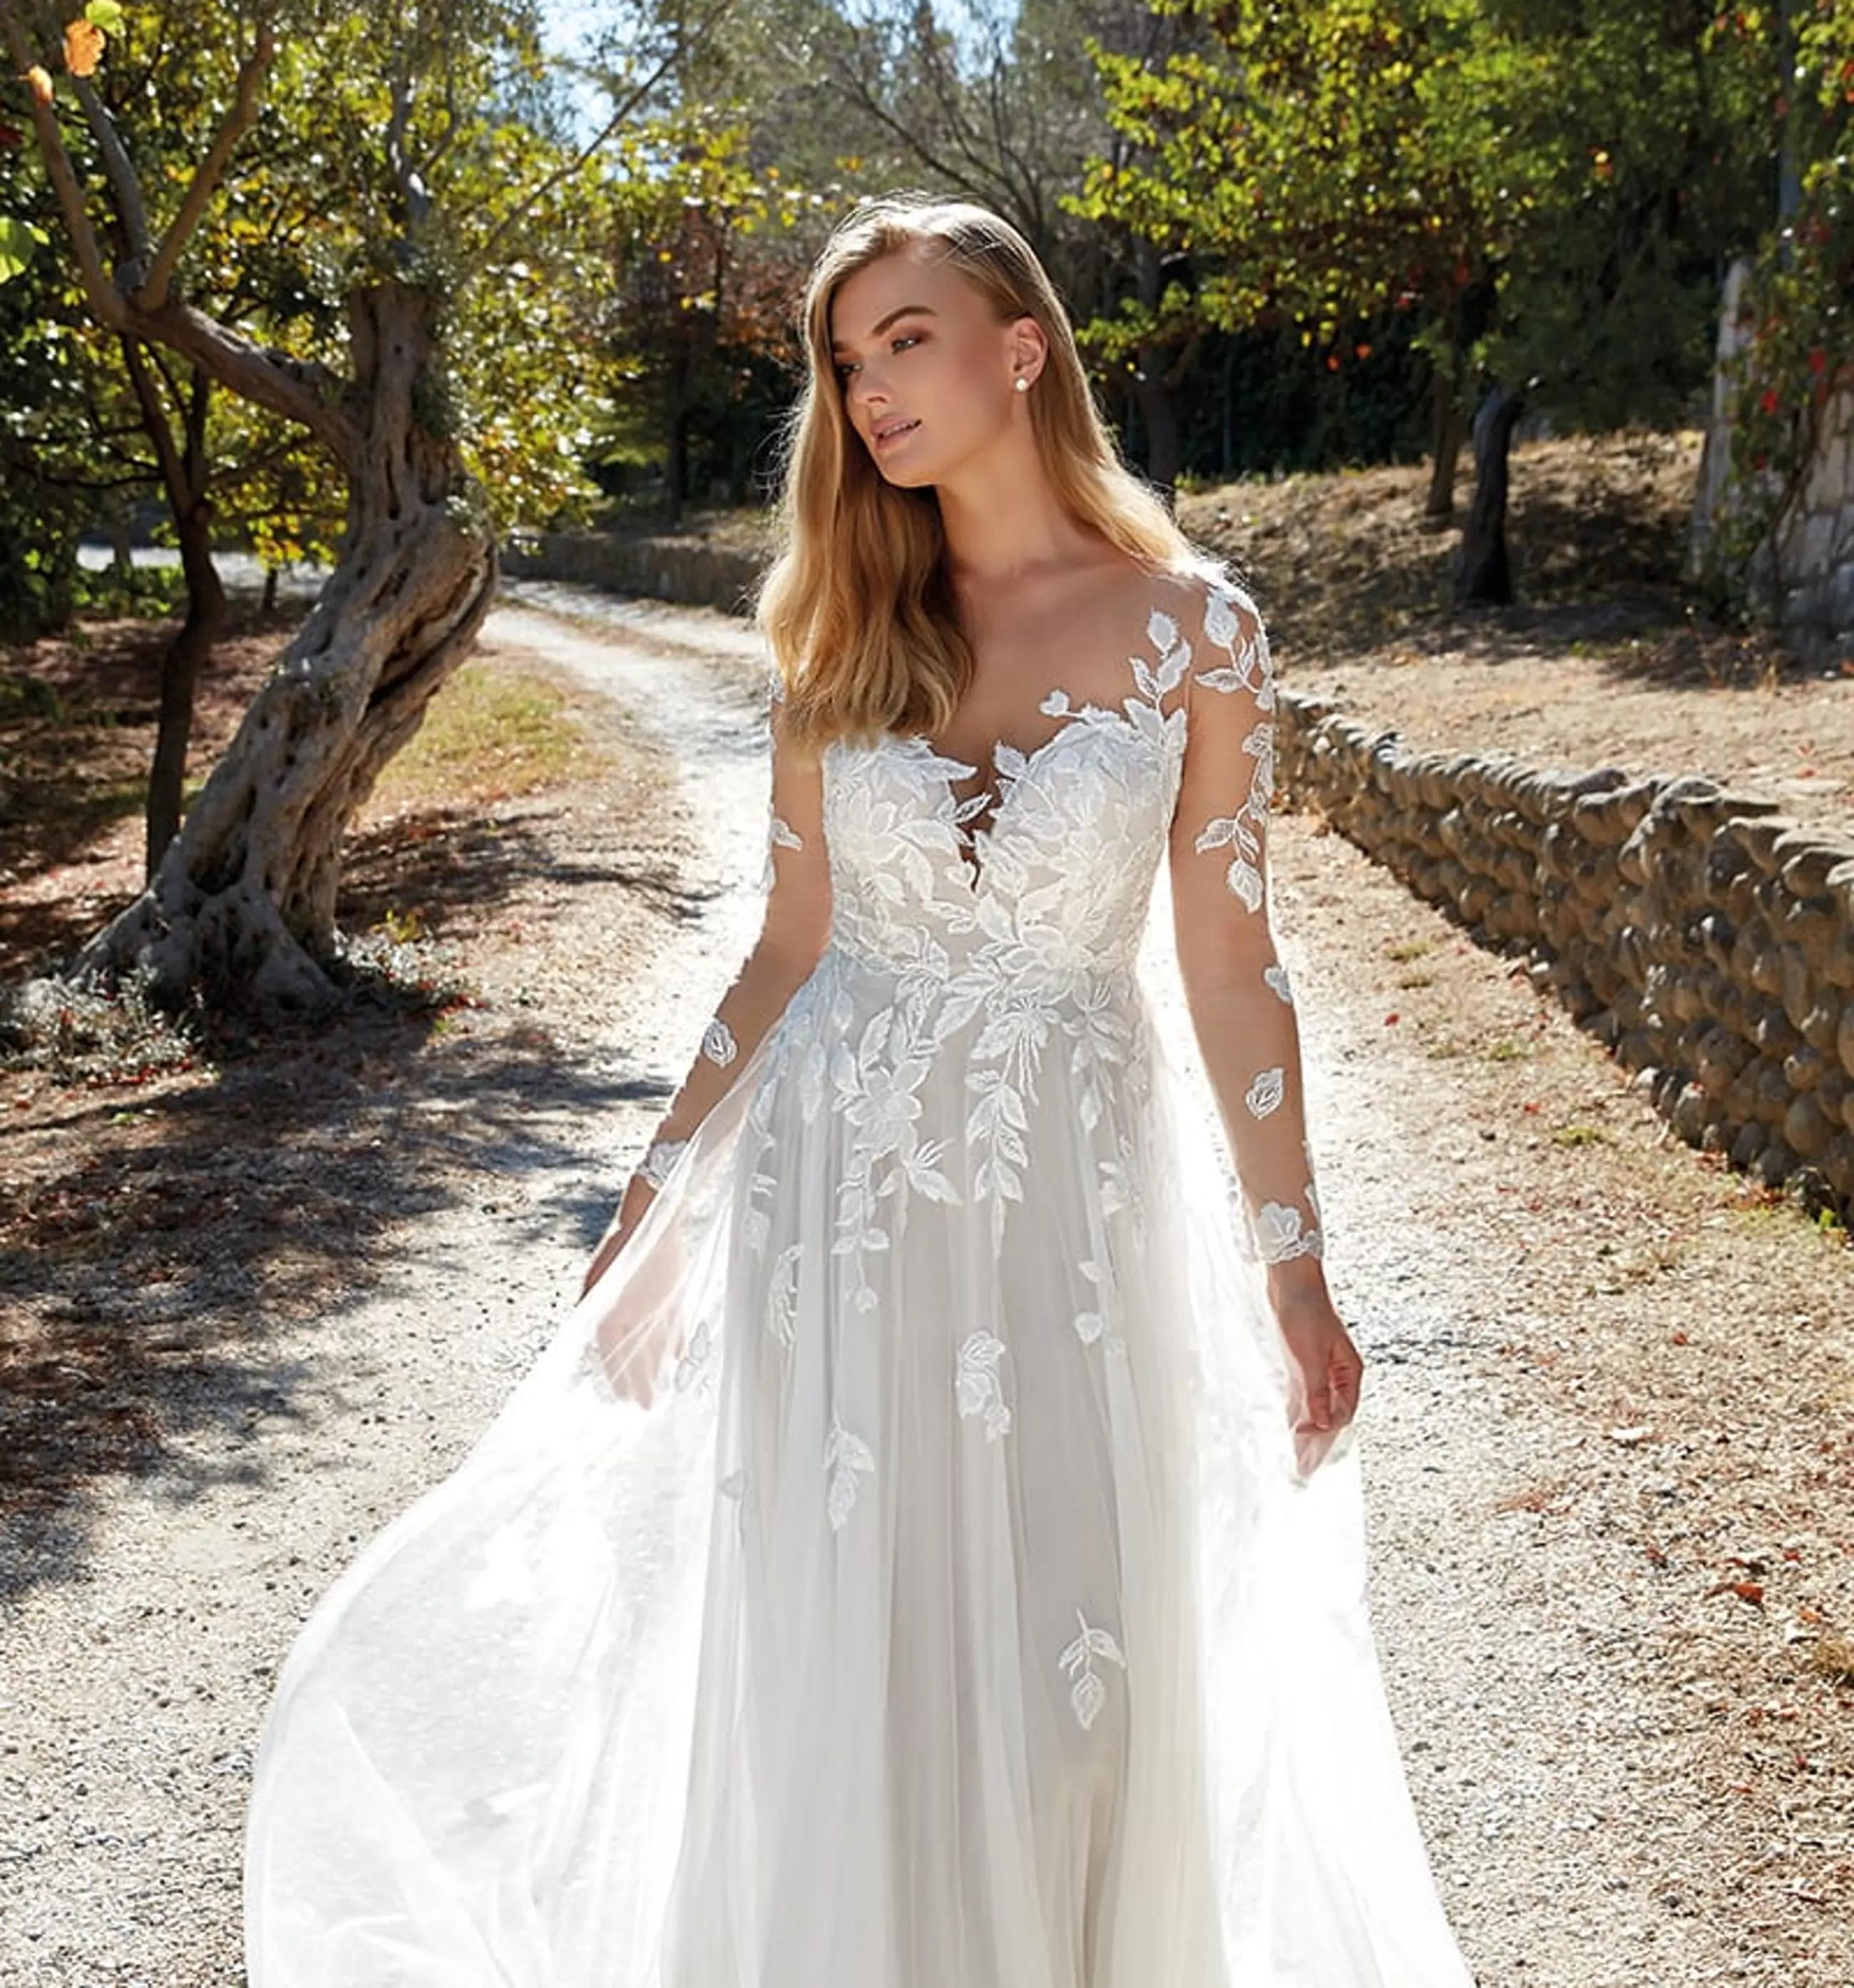 Bridal Gowns for Your Fall Wedding Image